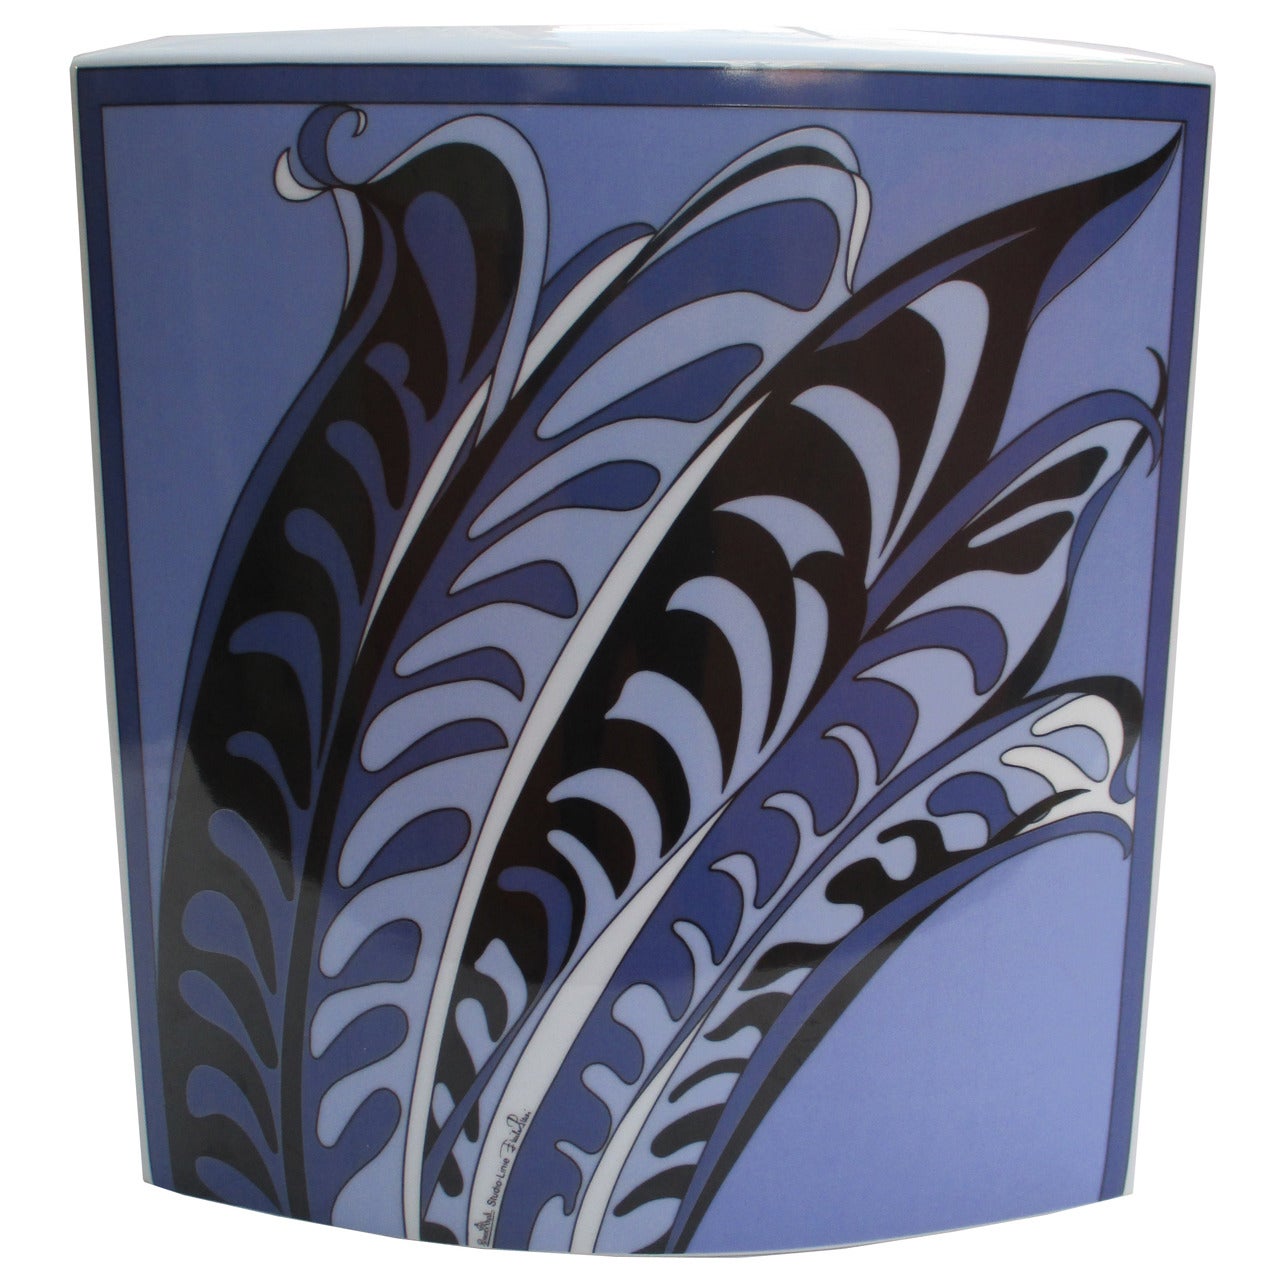 Large Vase by Emilio Pucci for Rosenthal